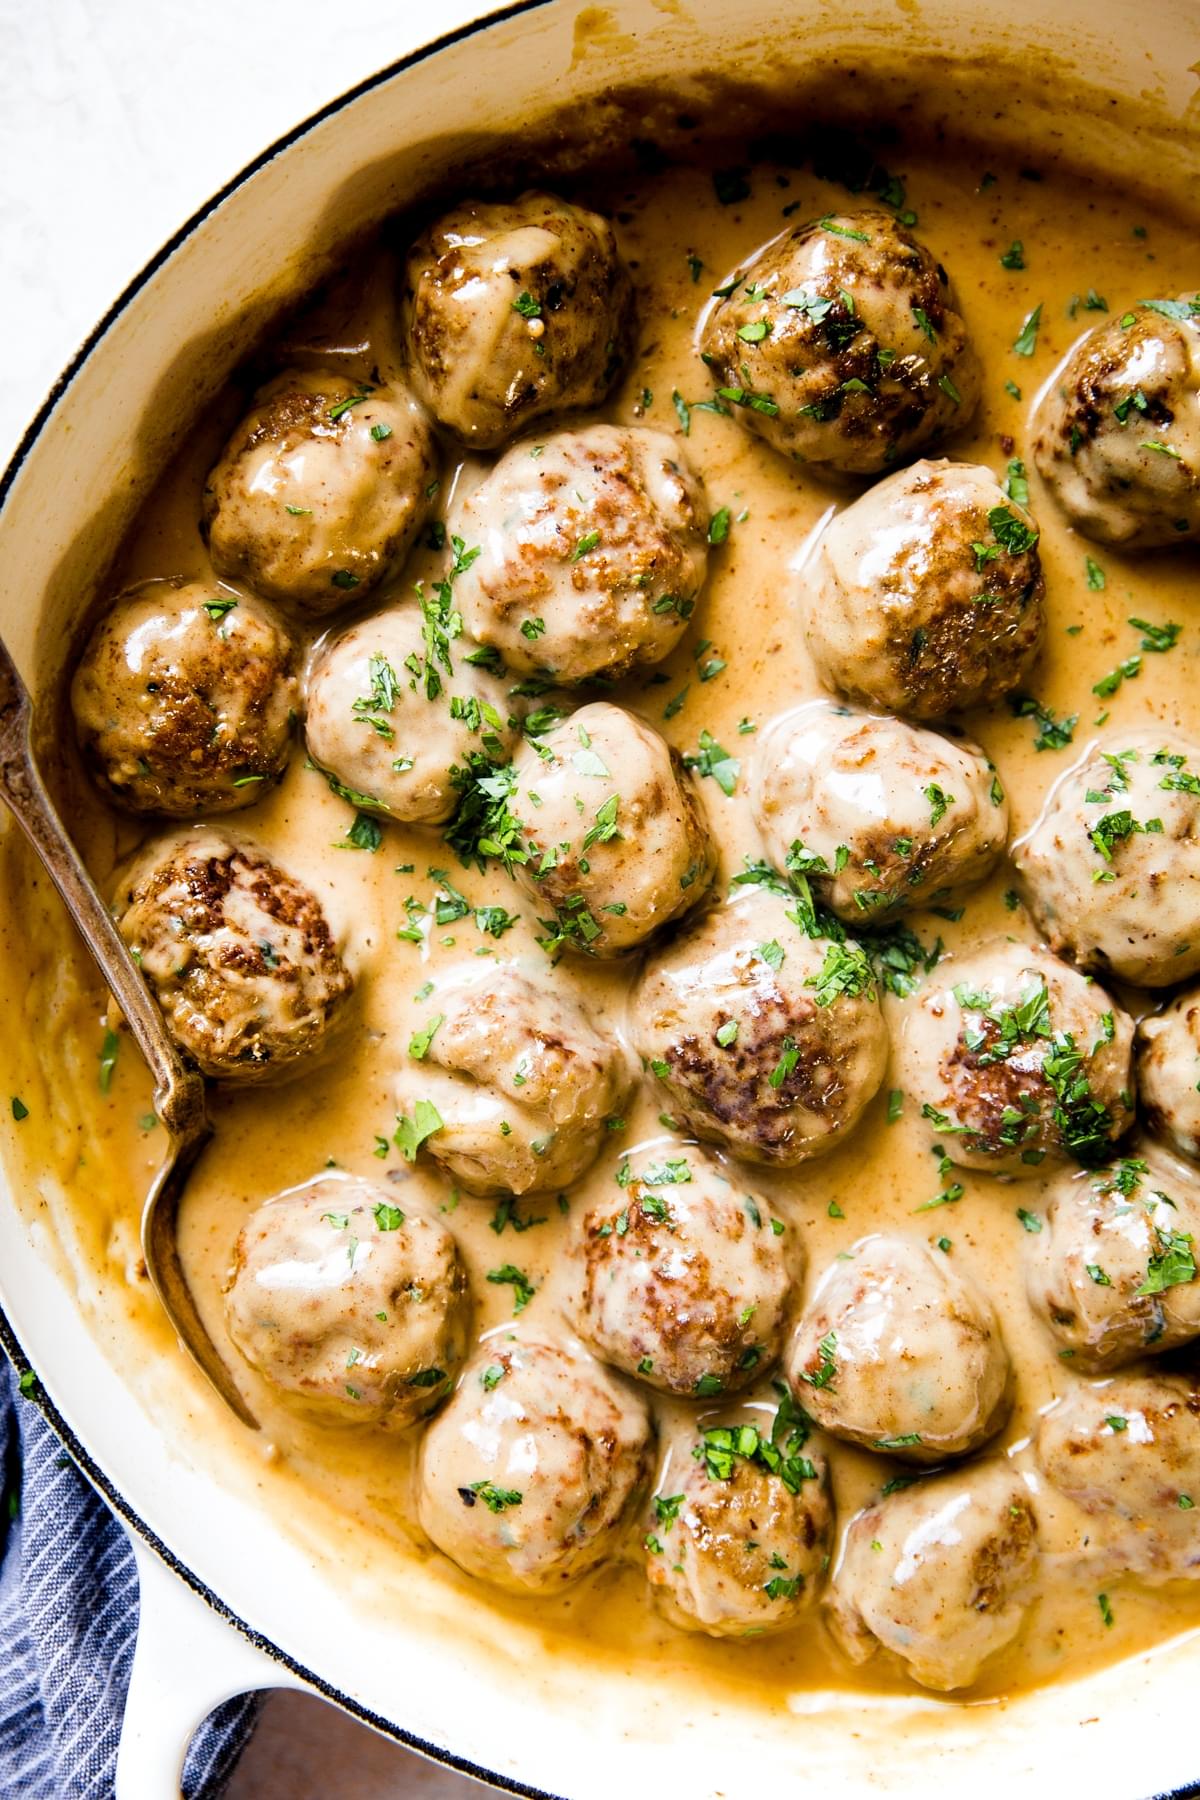 Swedish meatballs and creamy brown gravy in a pan with a serving spoon and linen.